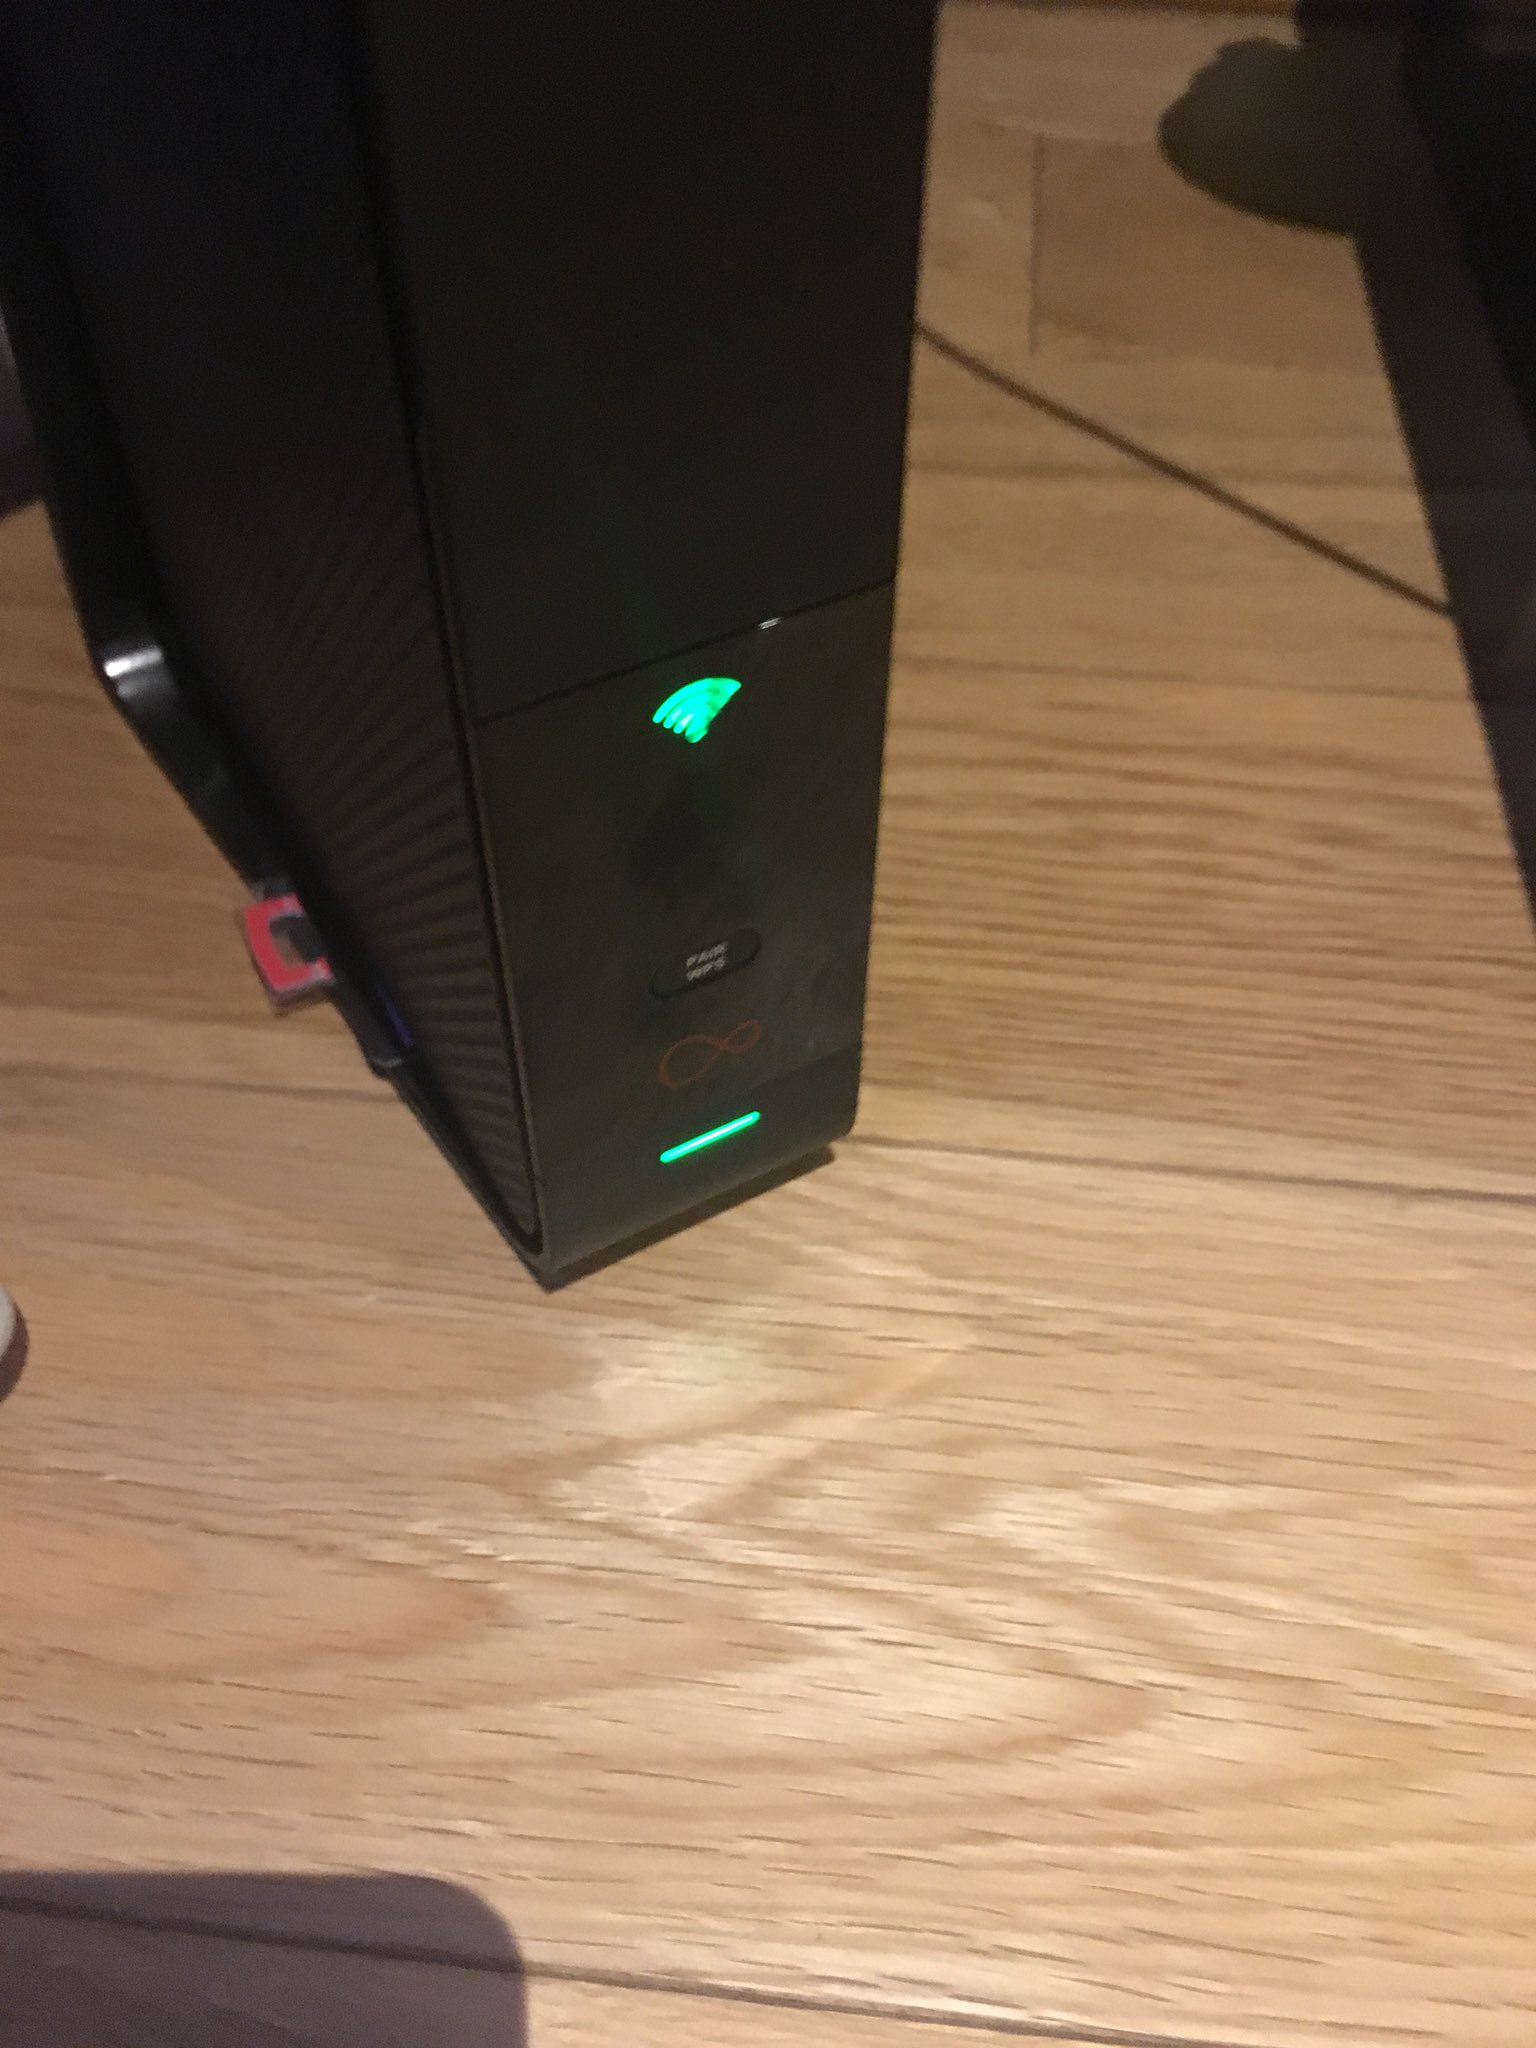 Virgin Media Router Flashing Green: Here’S What to Do